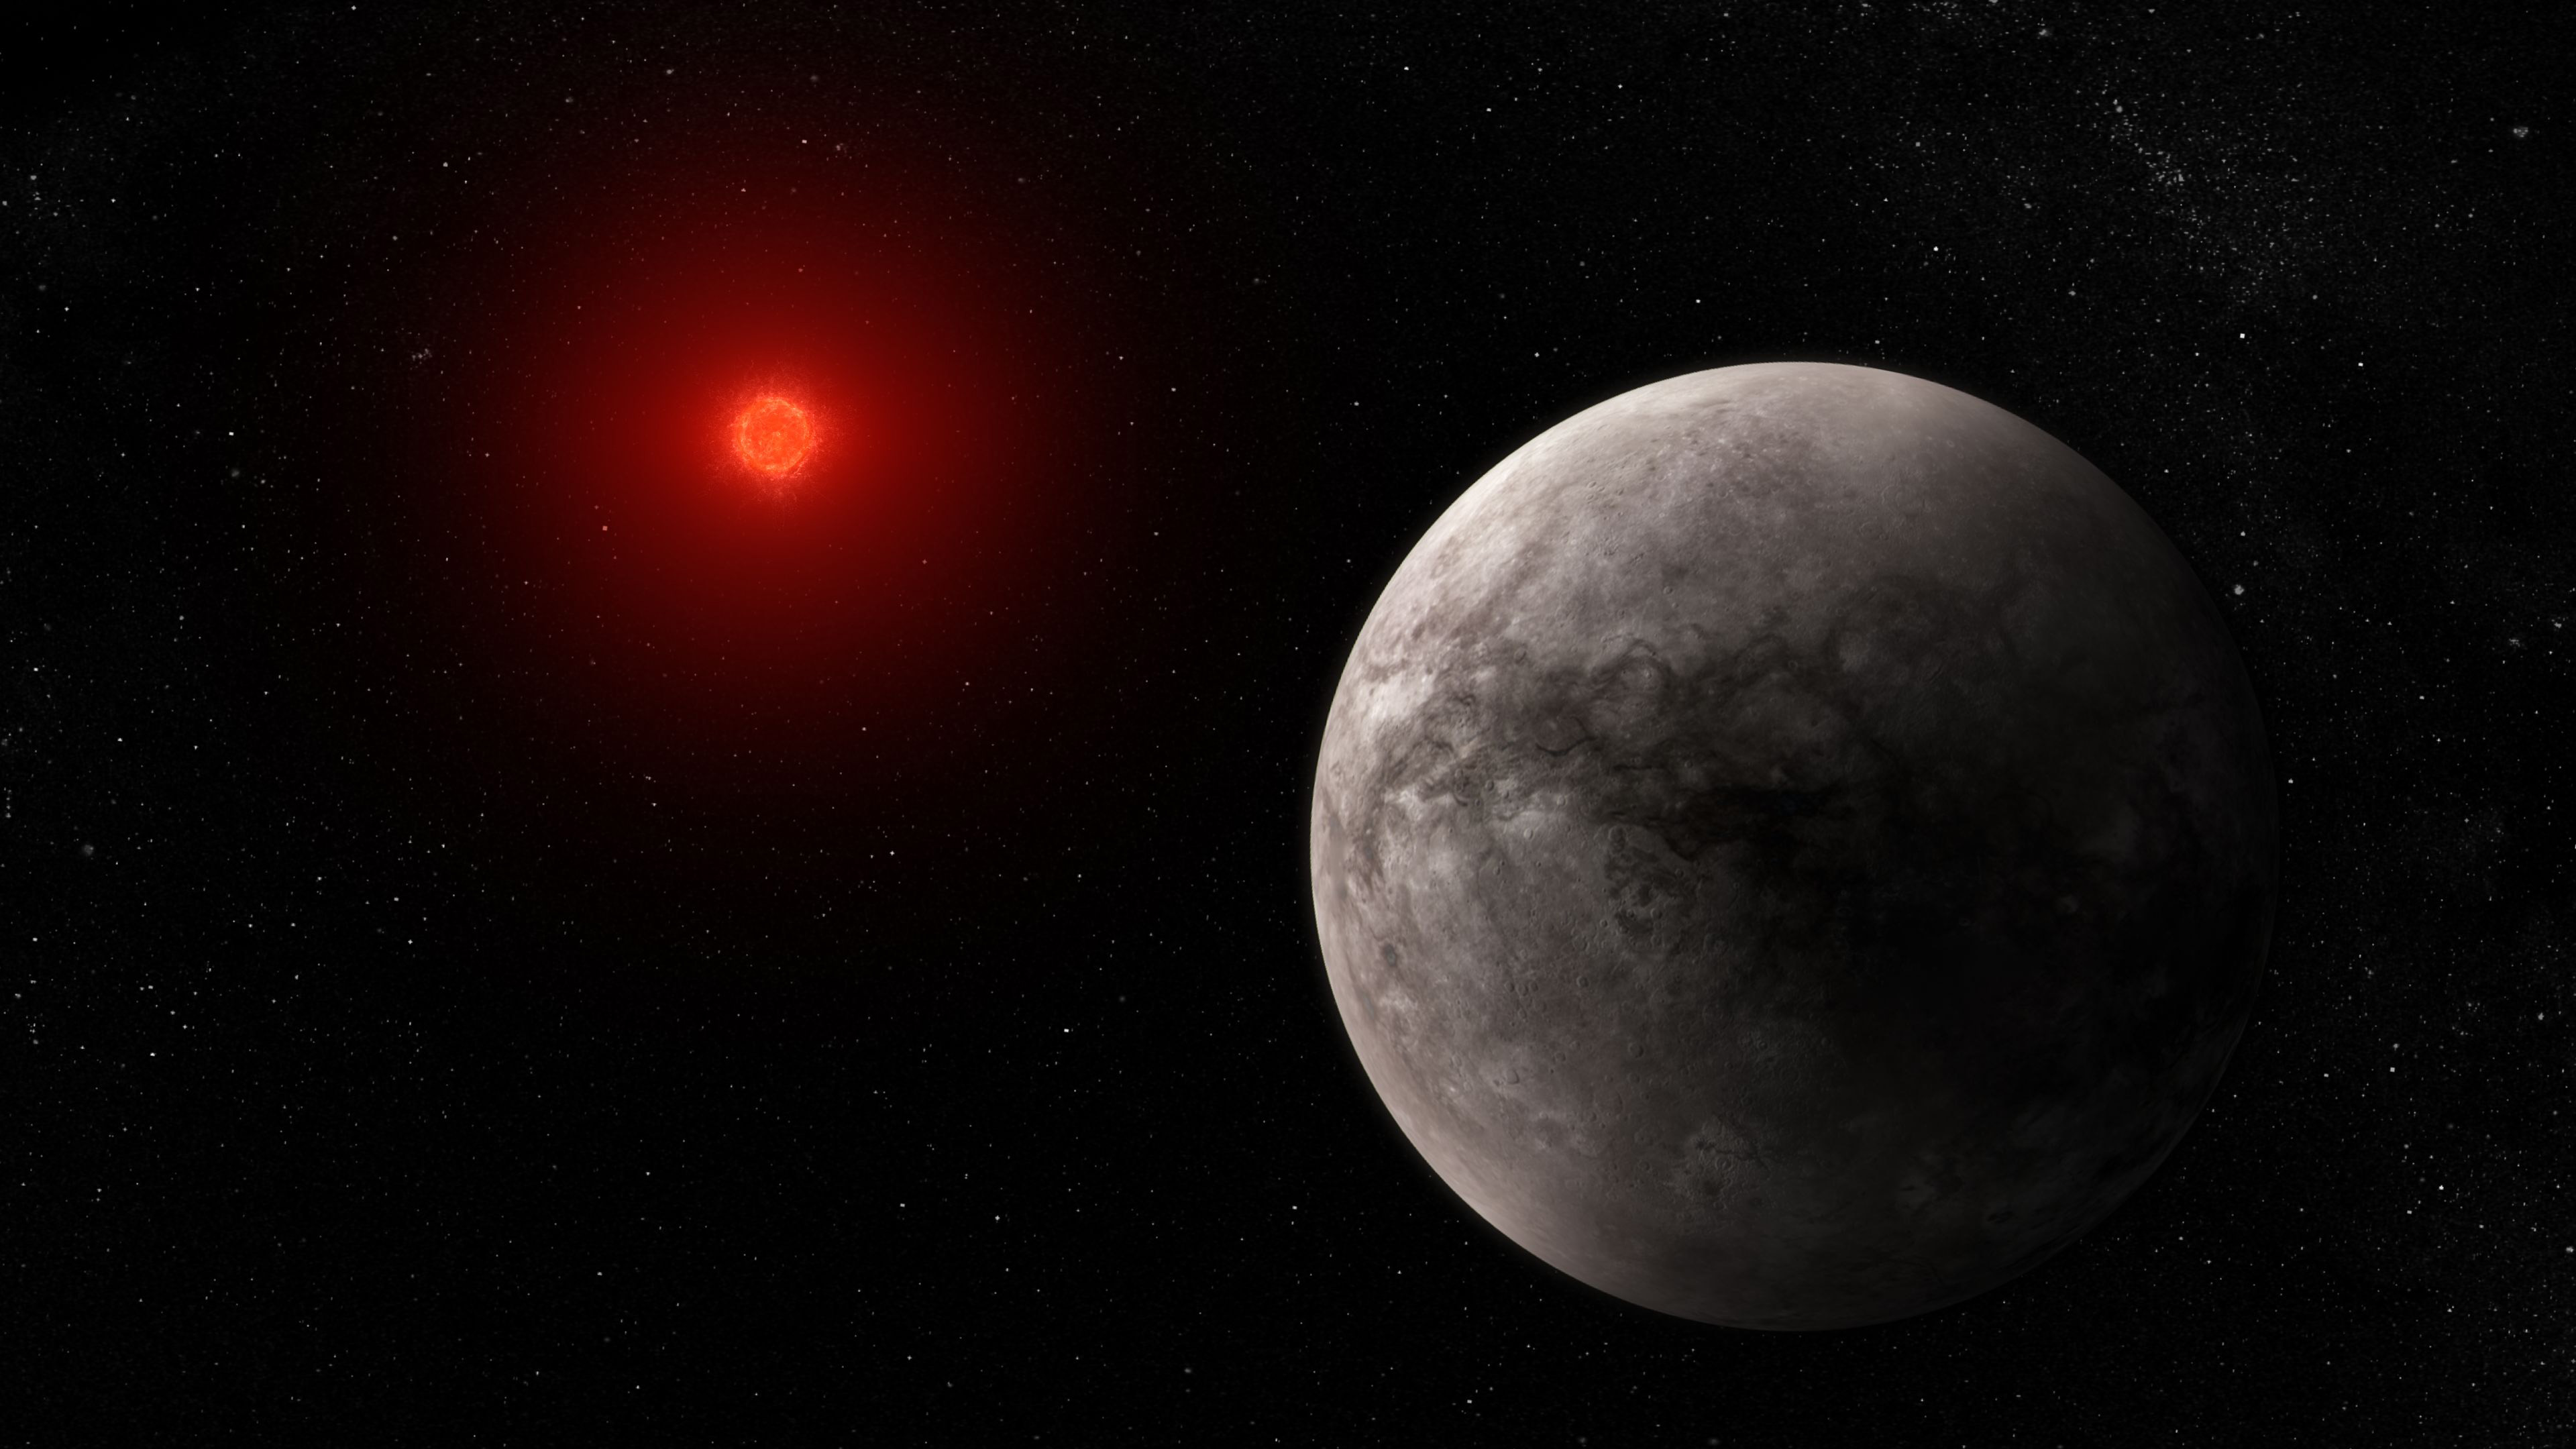 Planetary bodies observed for first time in habitable zone of dead star